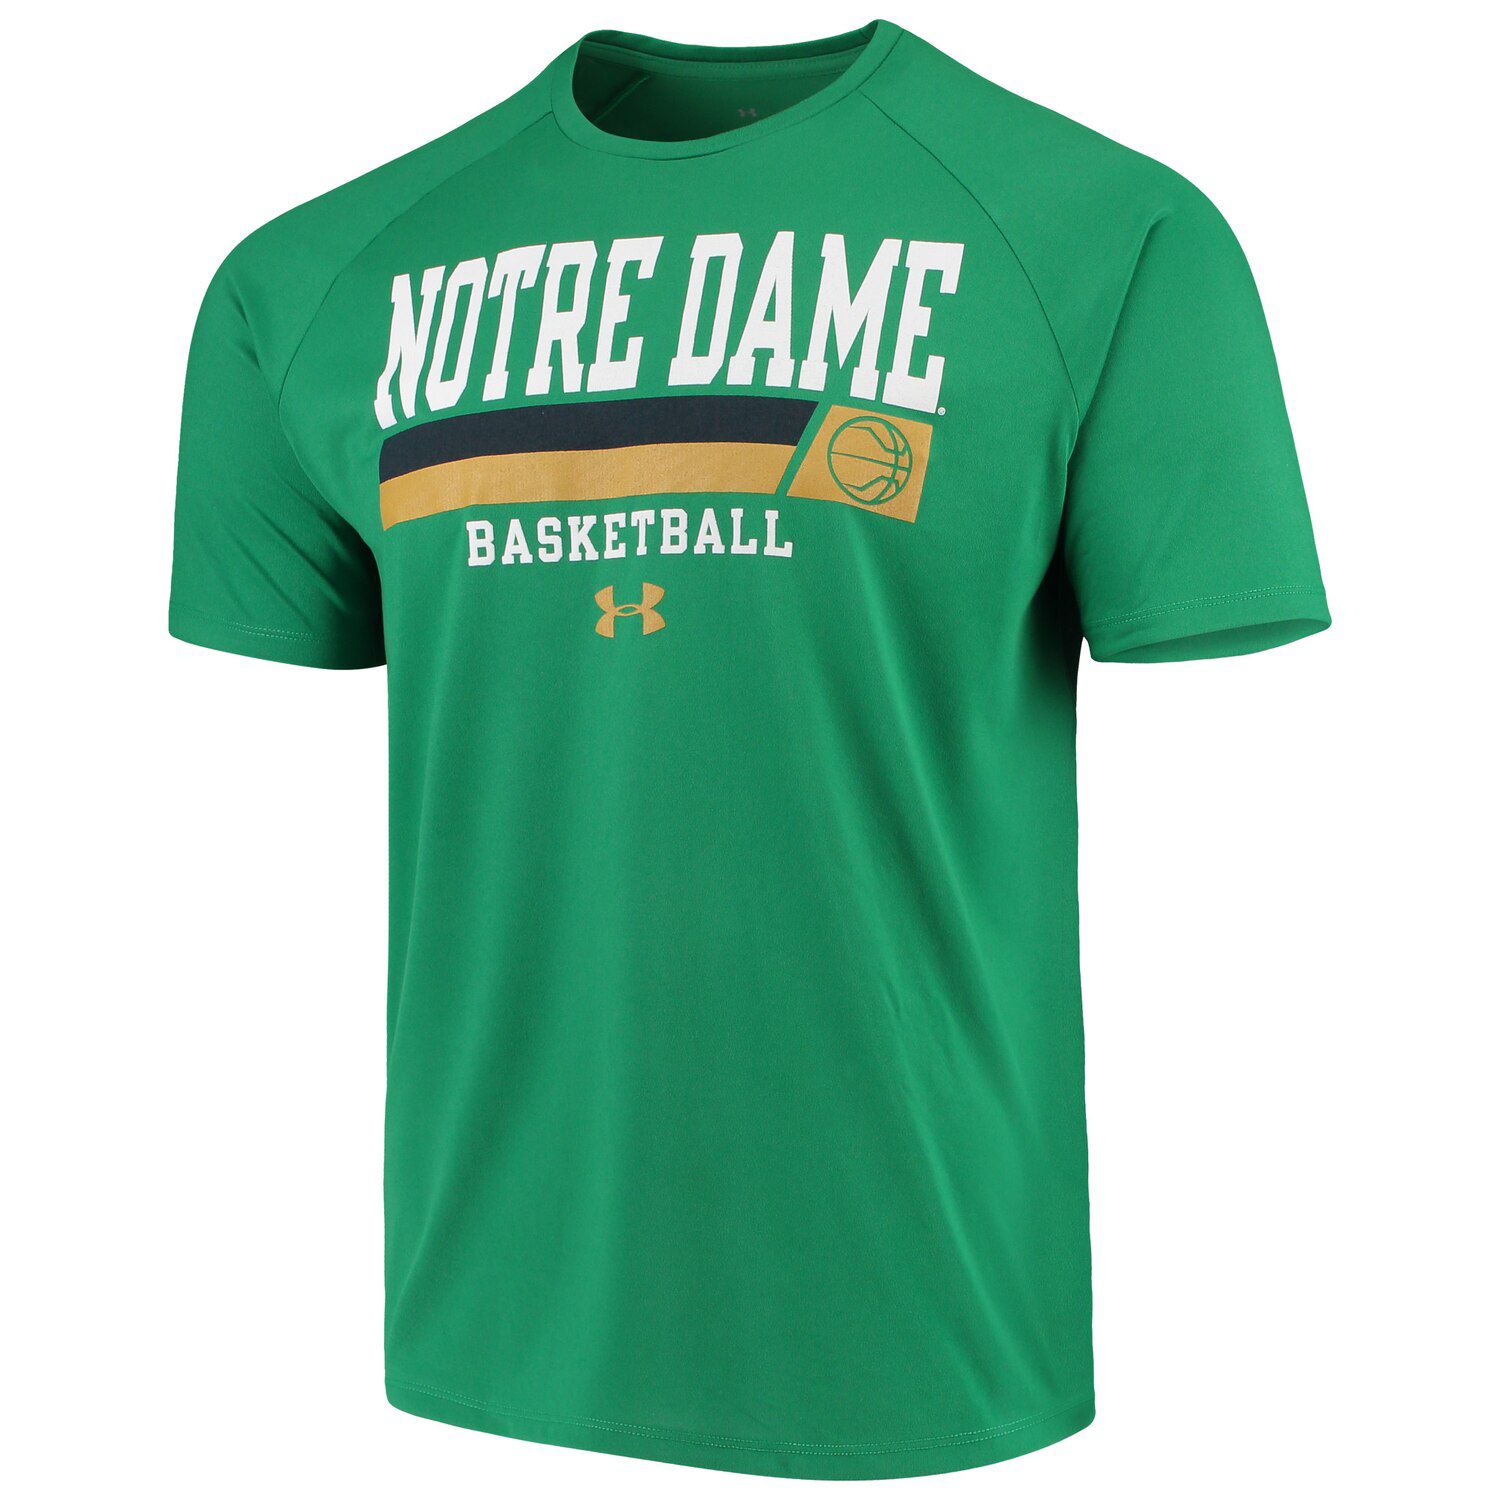 notre dame green under armour jersey